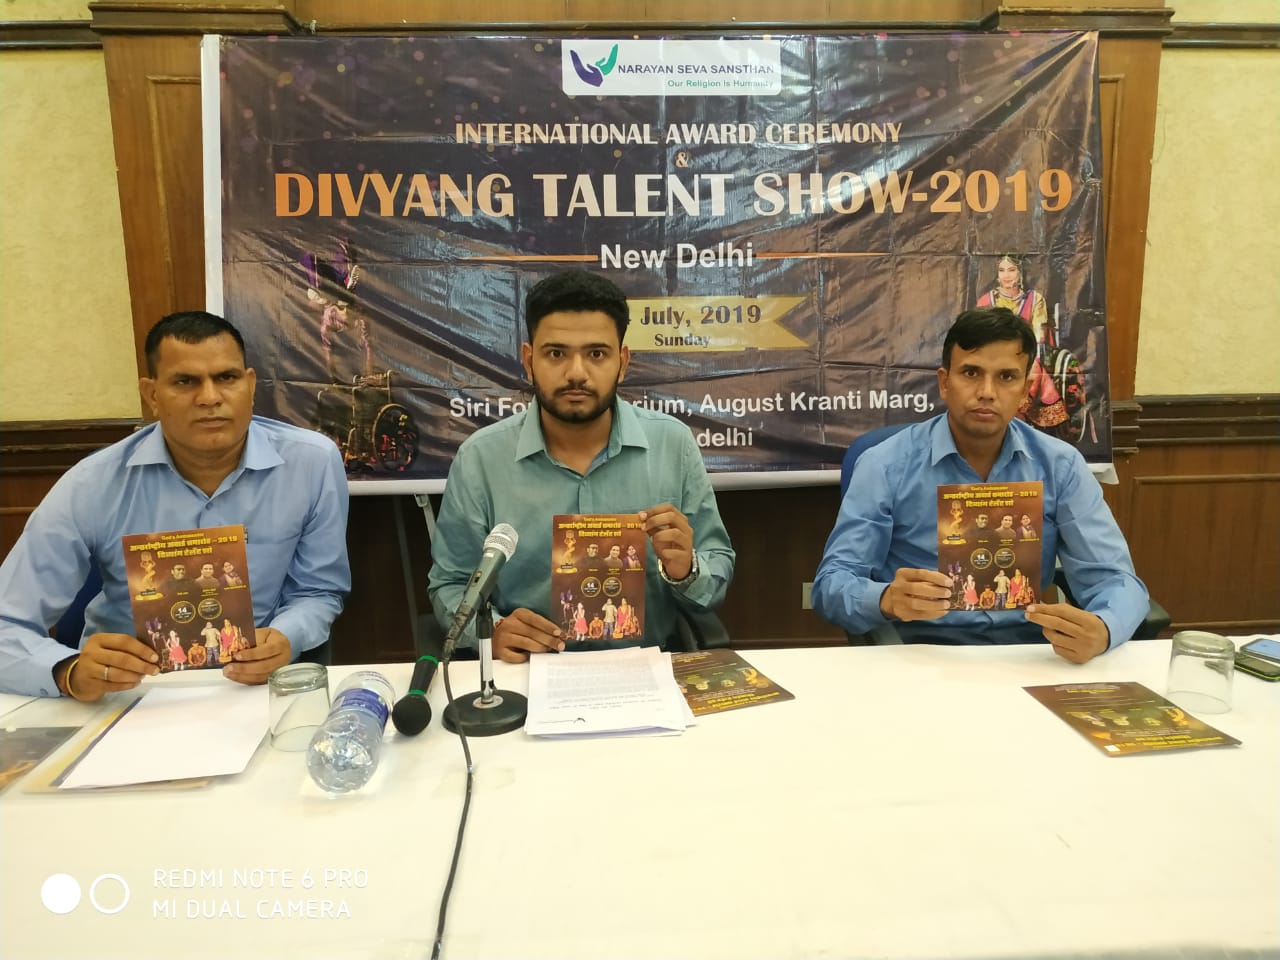 Divyang’s Got Talent – Let’s get ready to witness the epic performances by specially abled decoding=